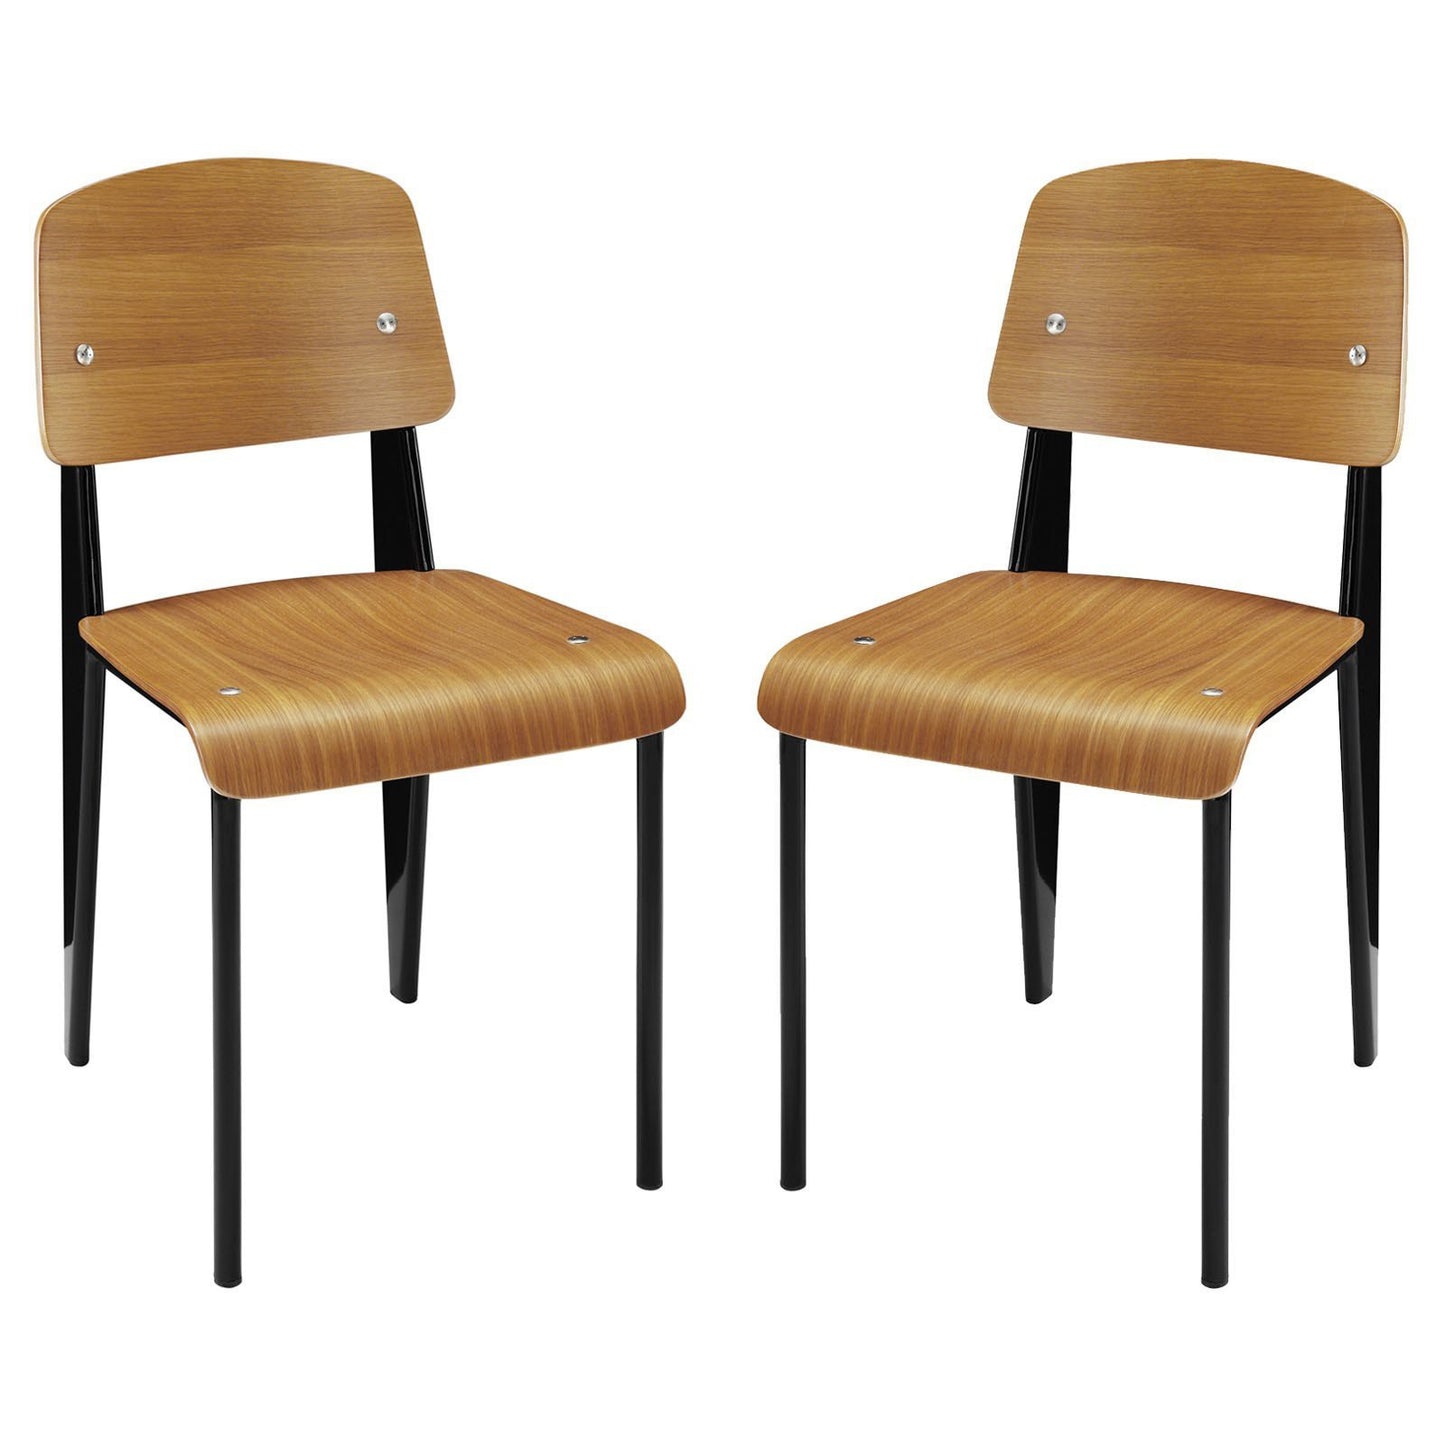 Shed Dining Side Chair Set of 2 - living-essentials